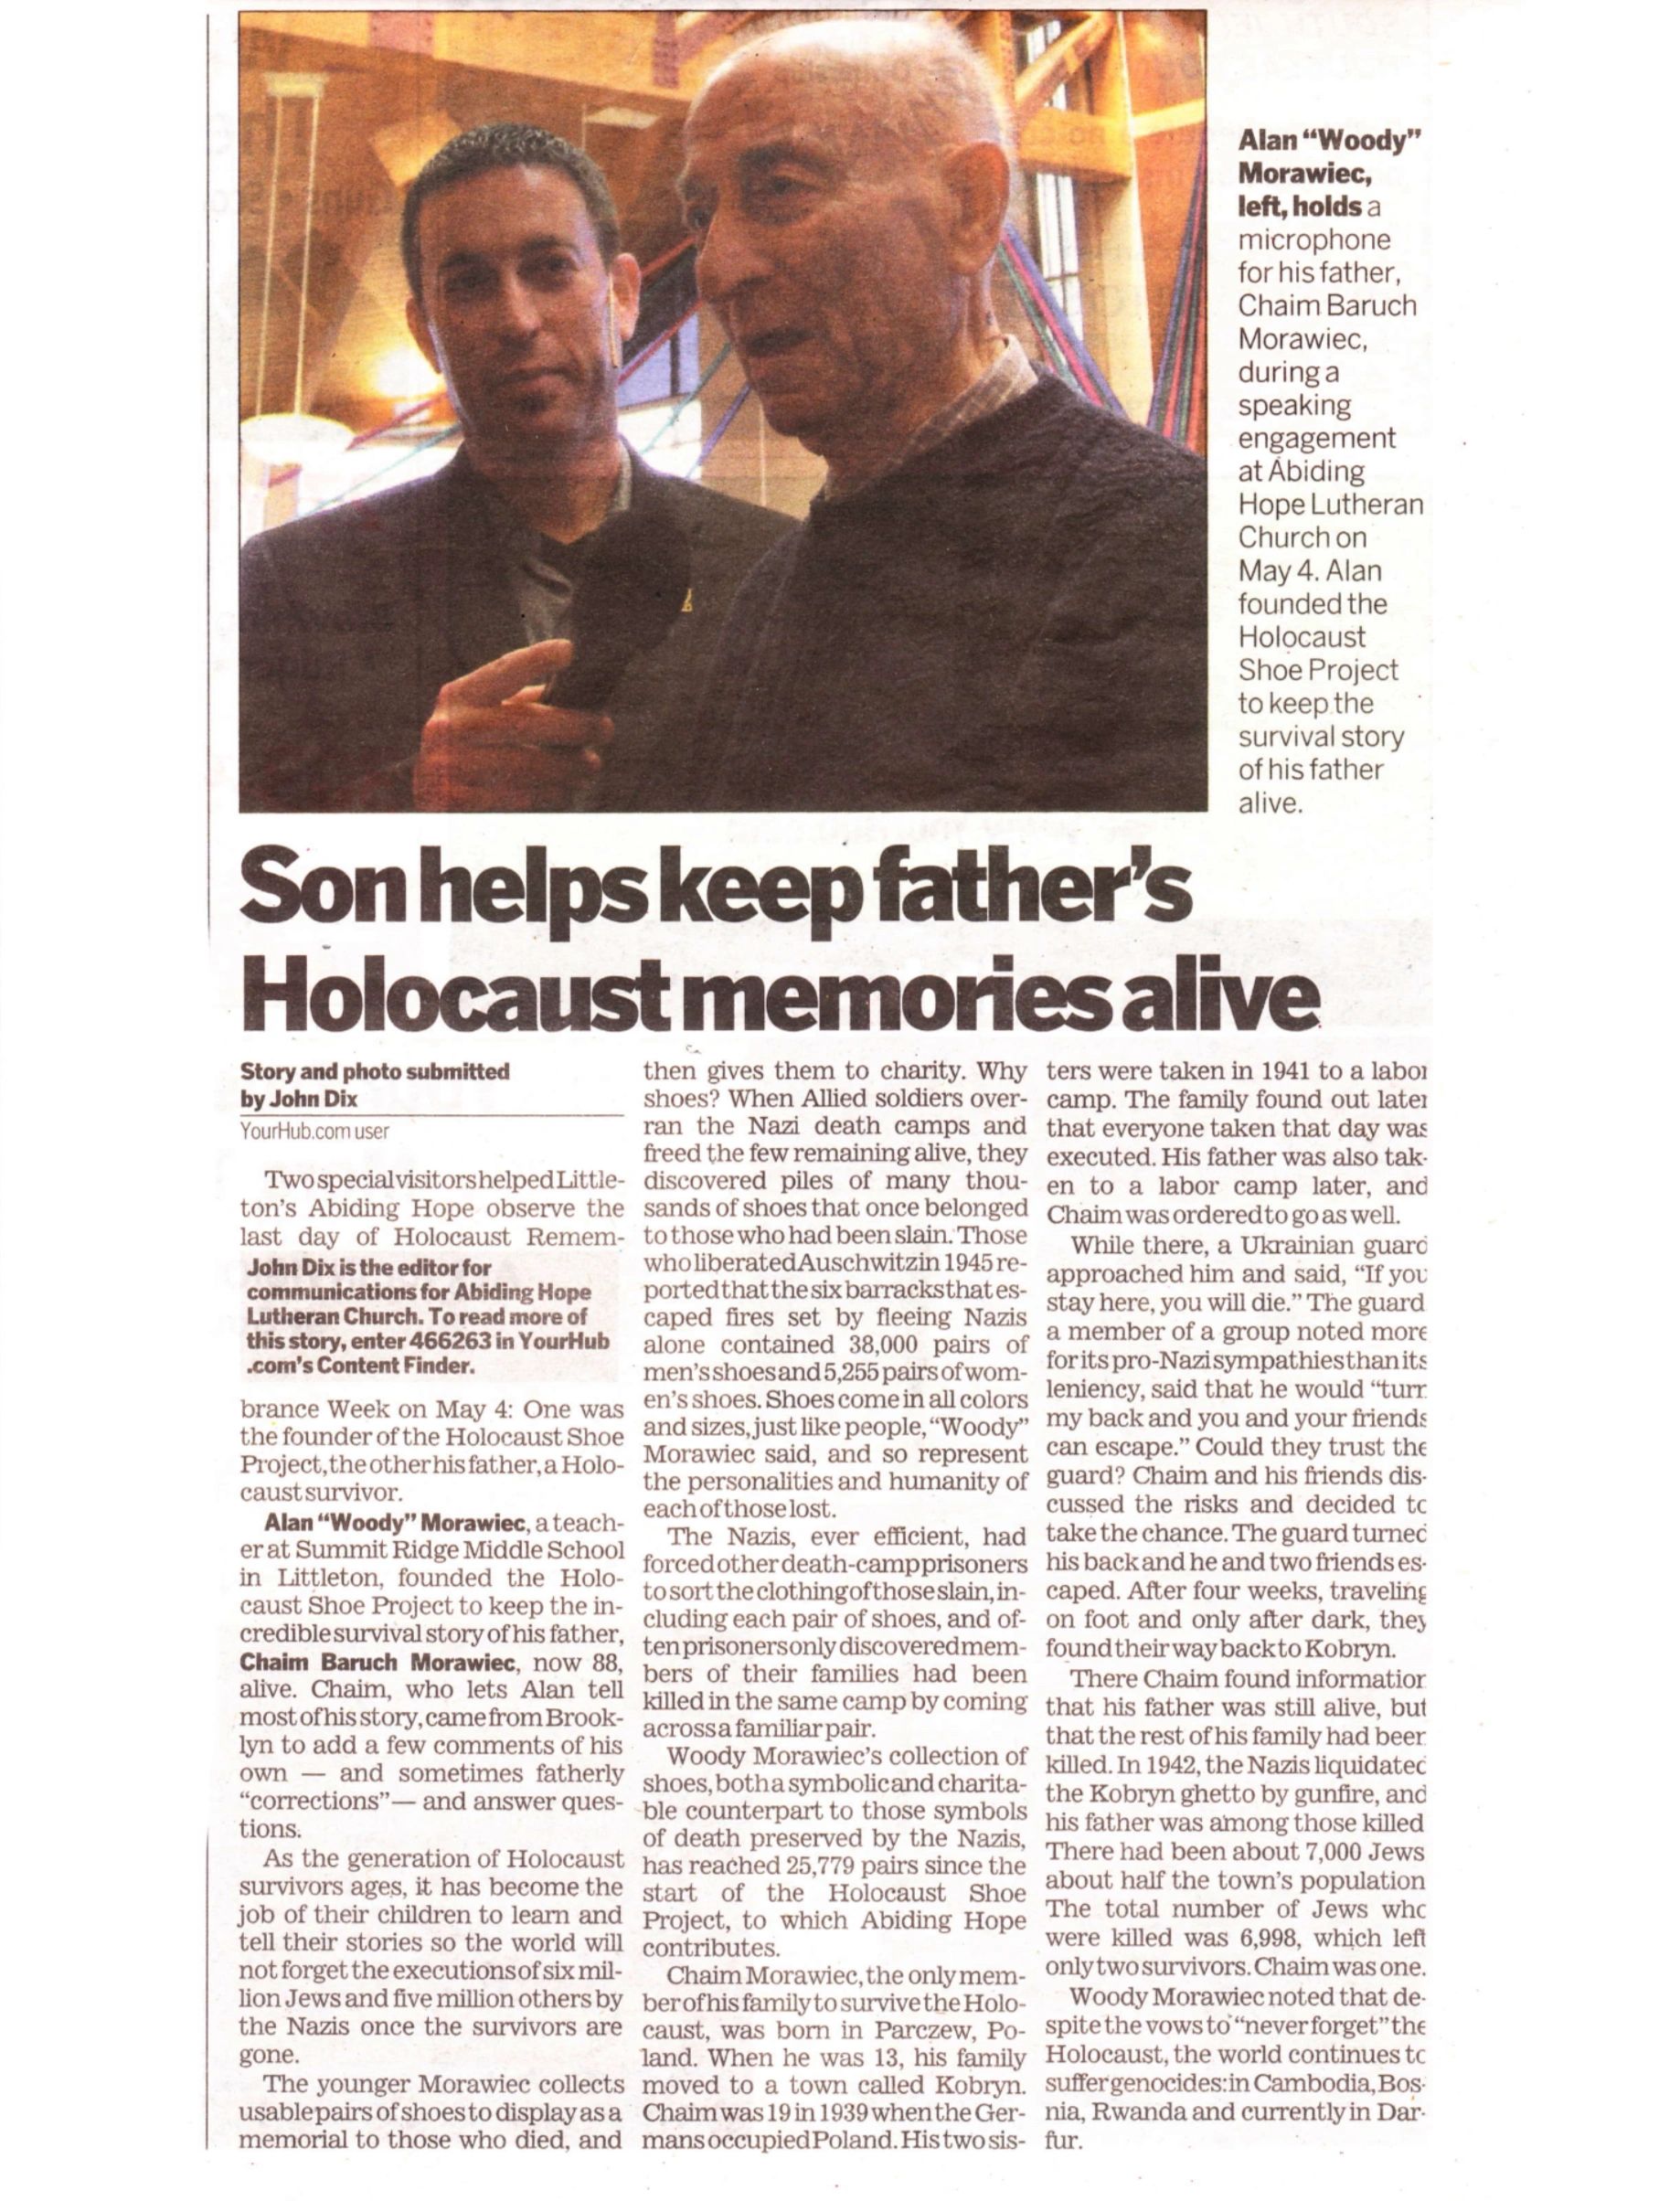 A news article featuring the son of a Holocaust survivor and his elderly father